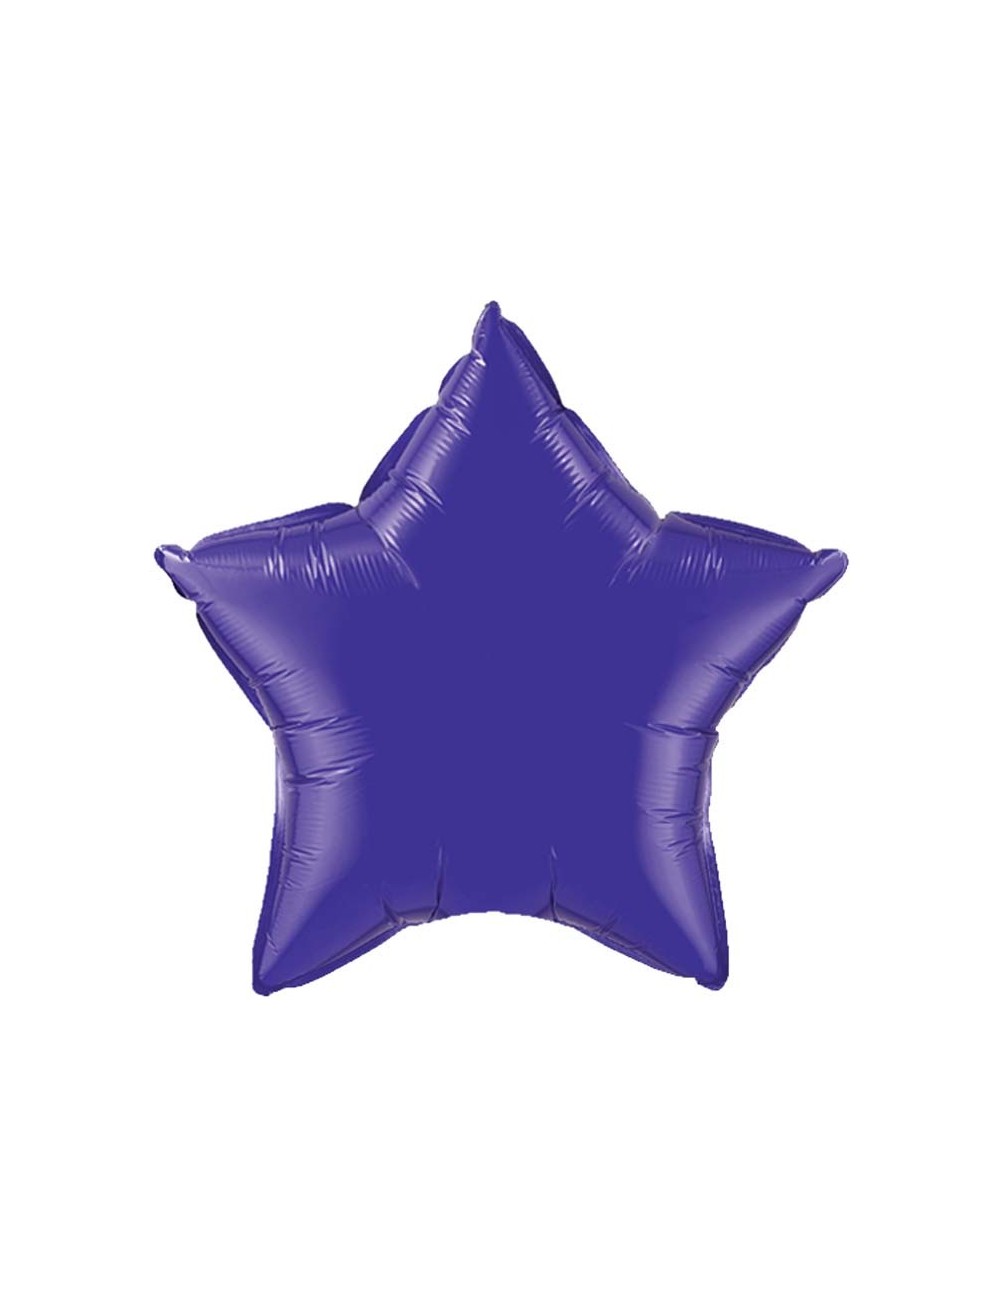 Aluminum balloon in the shape of a star 91 cm